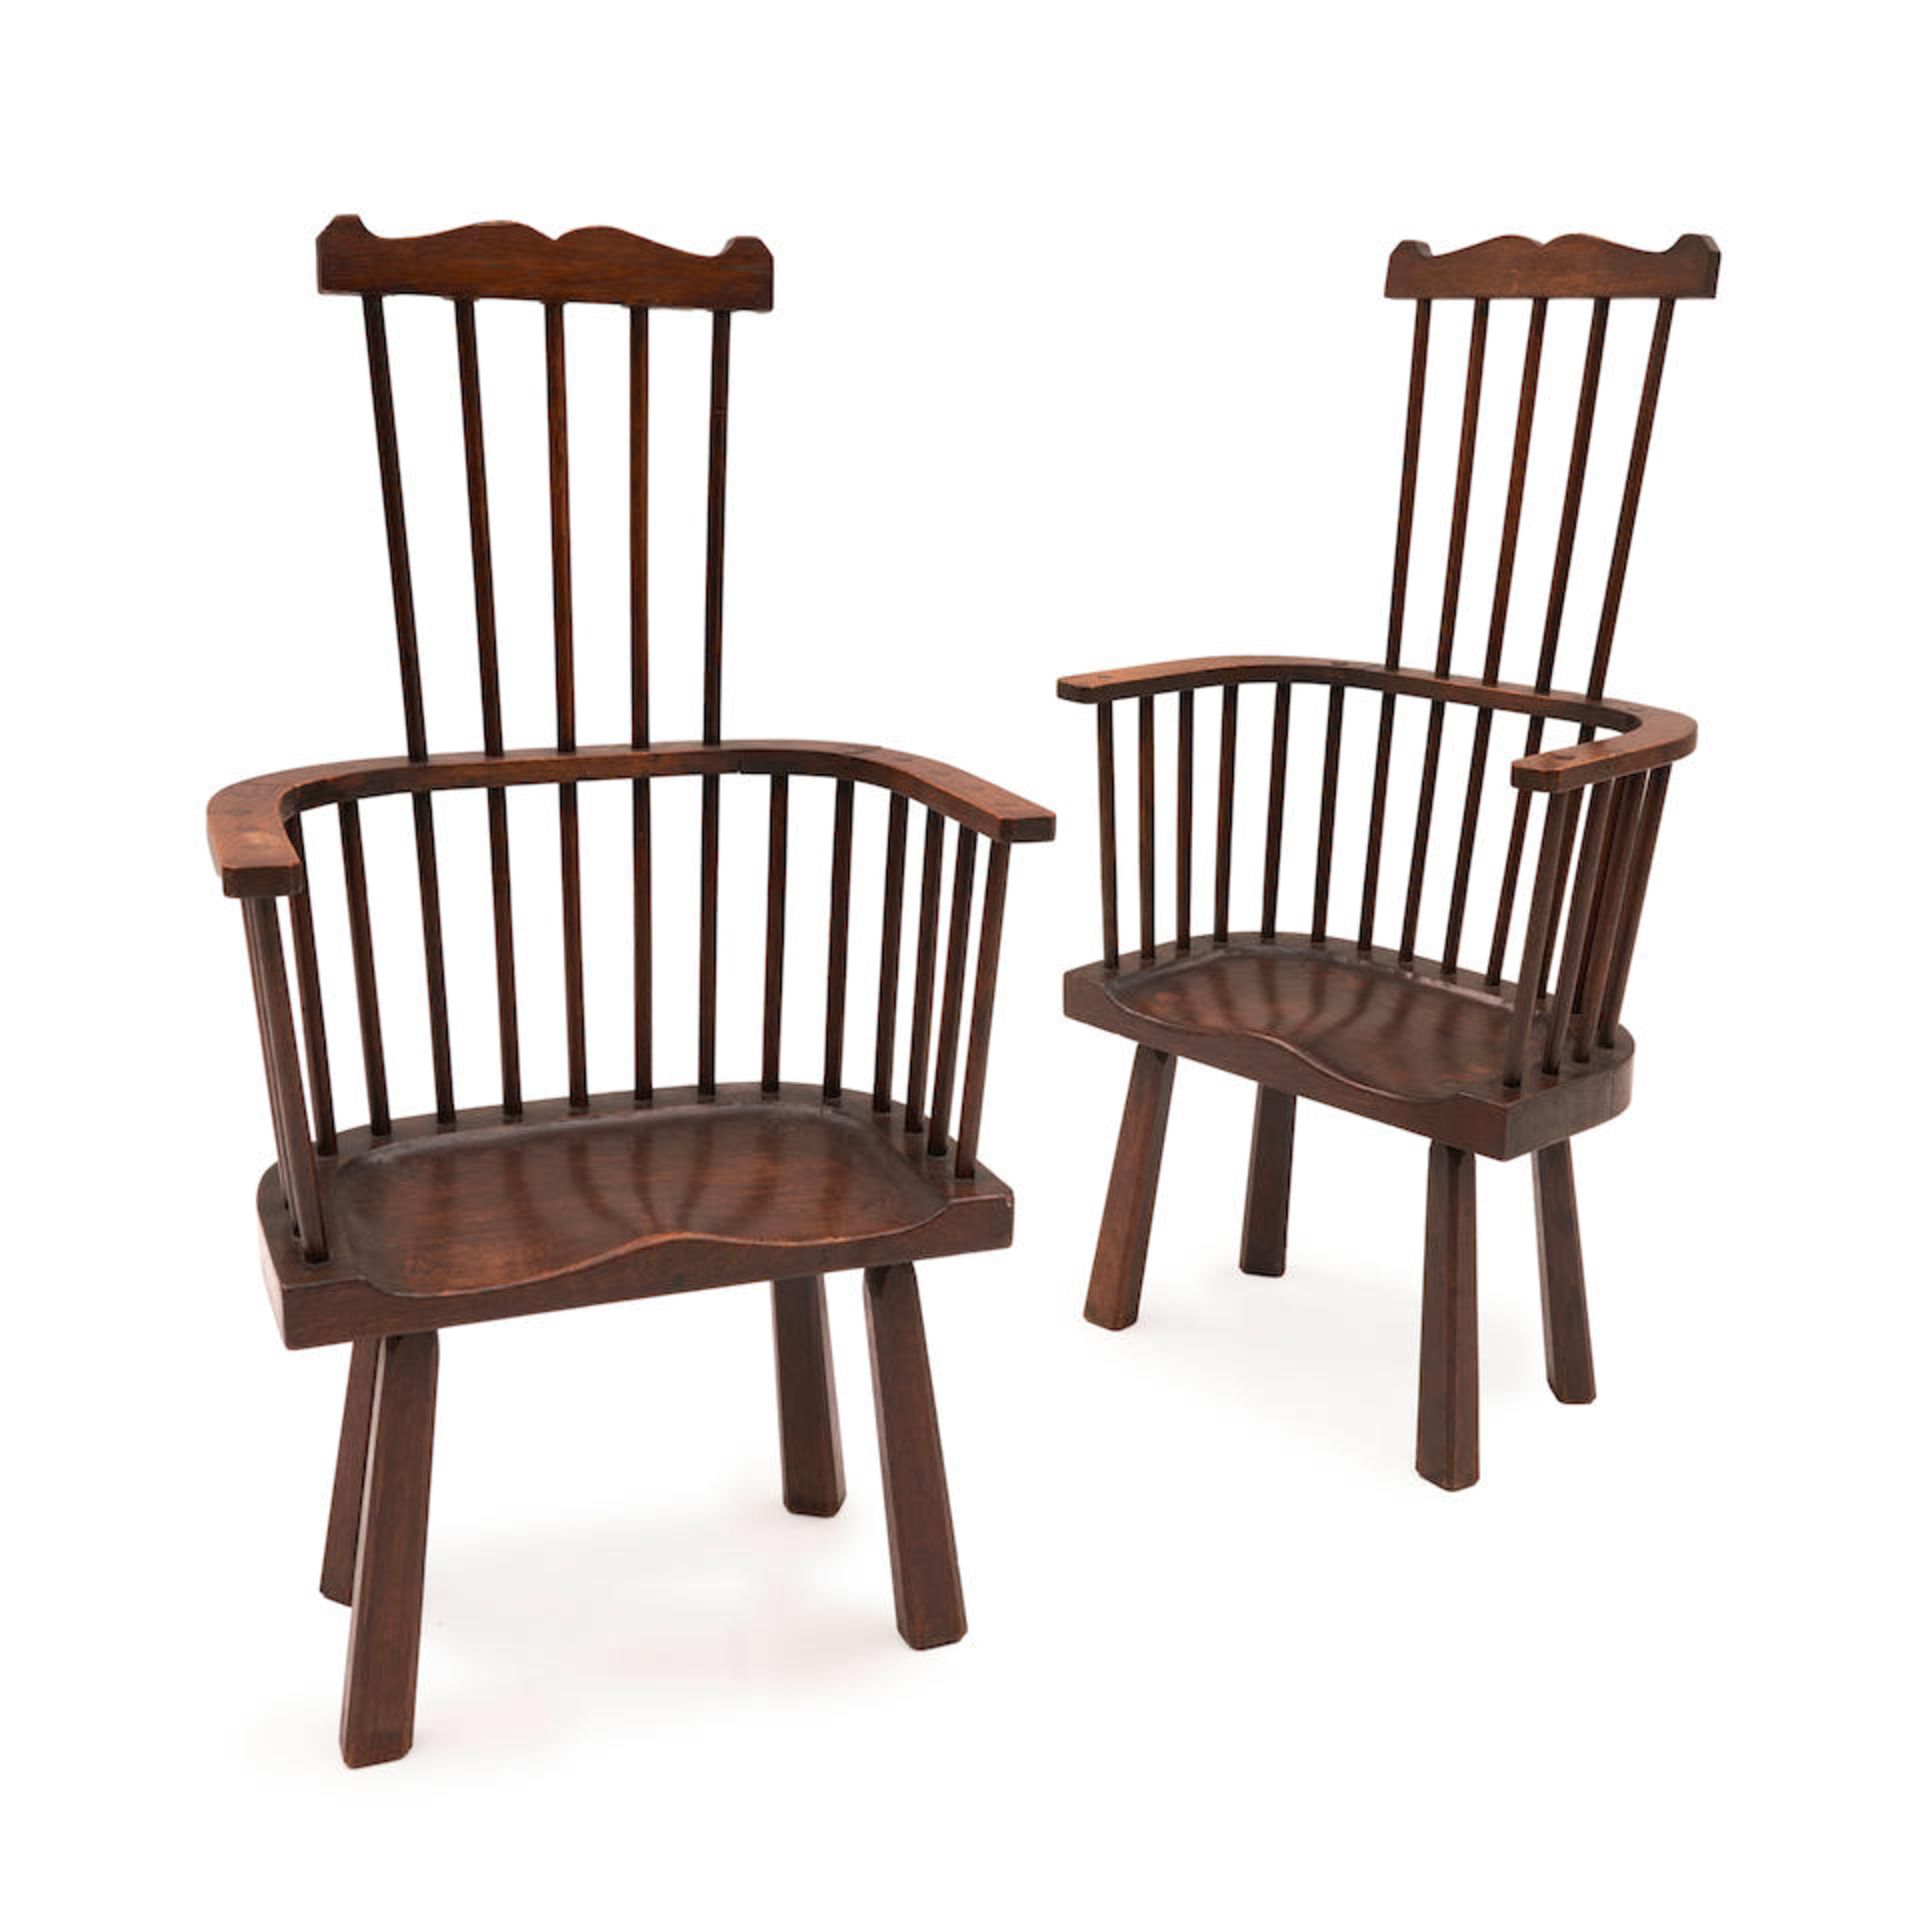 PAIR OF ARTS AND CRAFTS OAK COMB BACK ARMCHAIRS